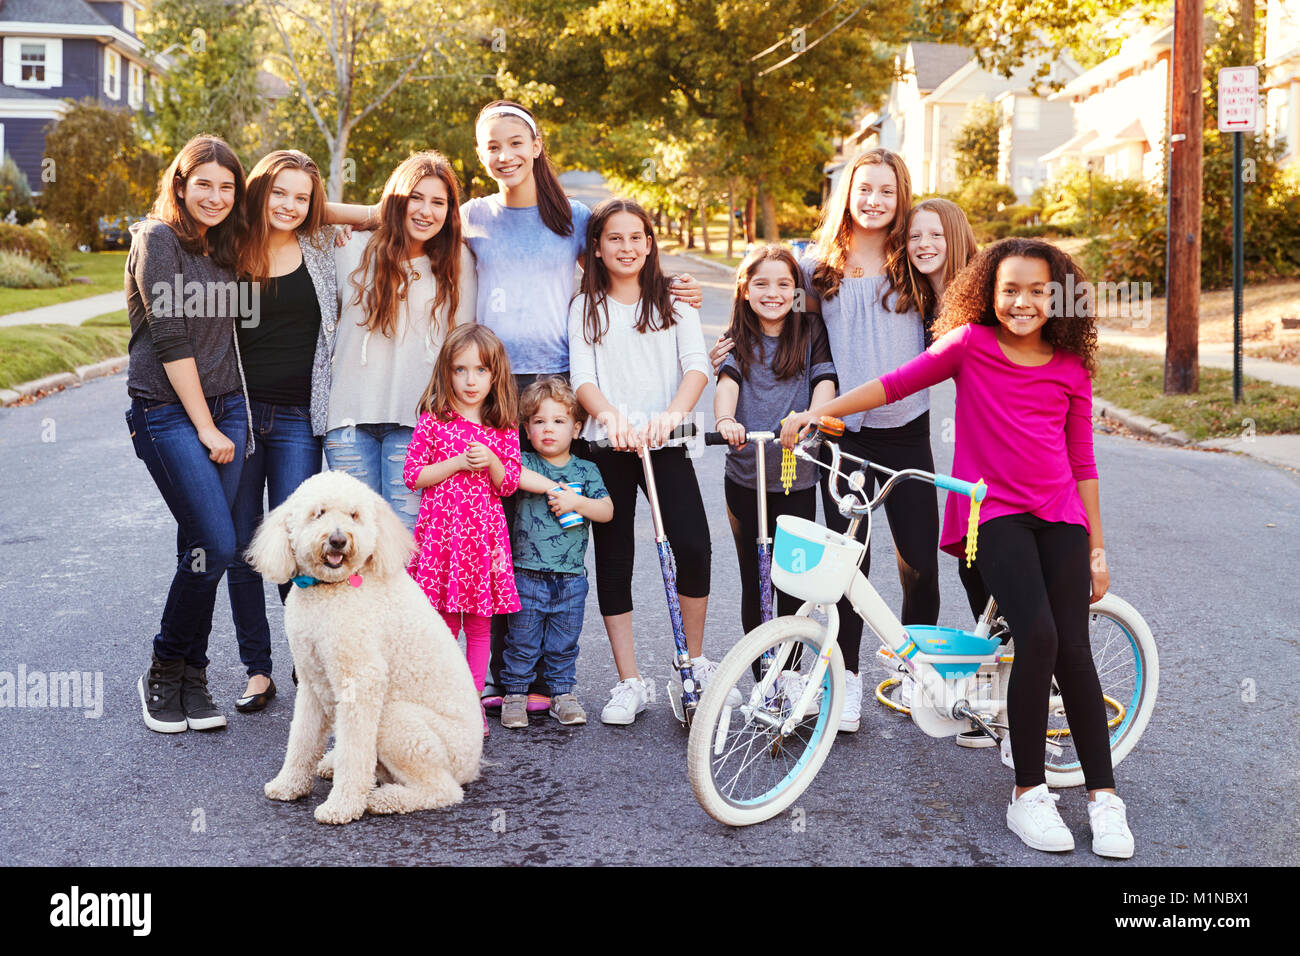 Group of kids with dog smile to camera in a residential street Stock Photo